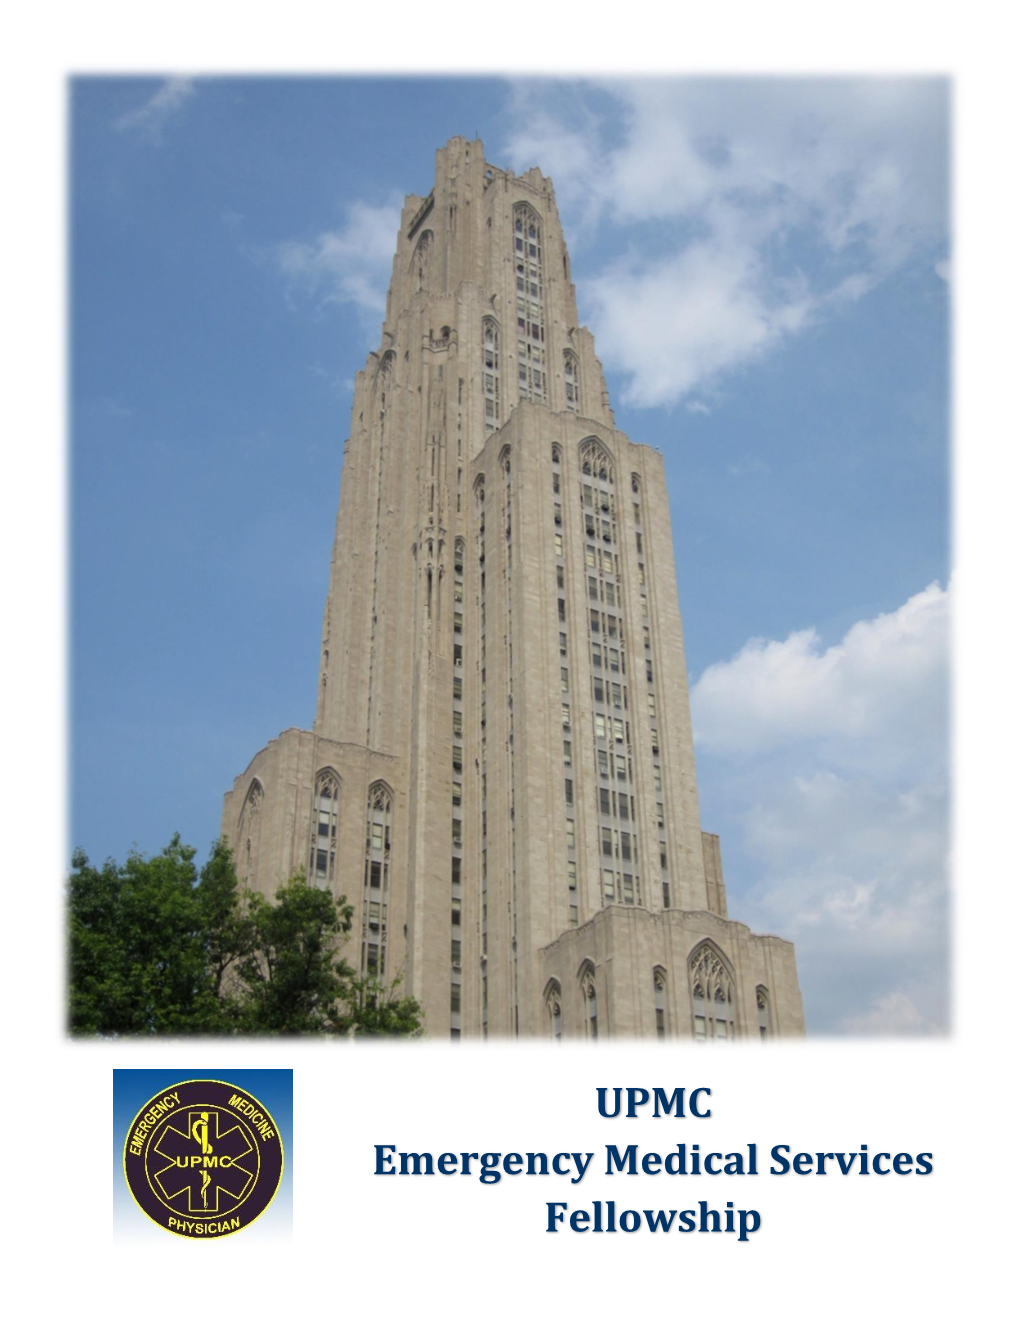 UPMC Emergency Medical Services Fellowship, Which Is Offered Through the Department of Emergency Medicine of the University of Pittsburgh School of Medicine